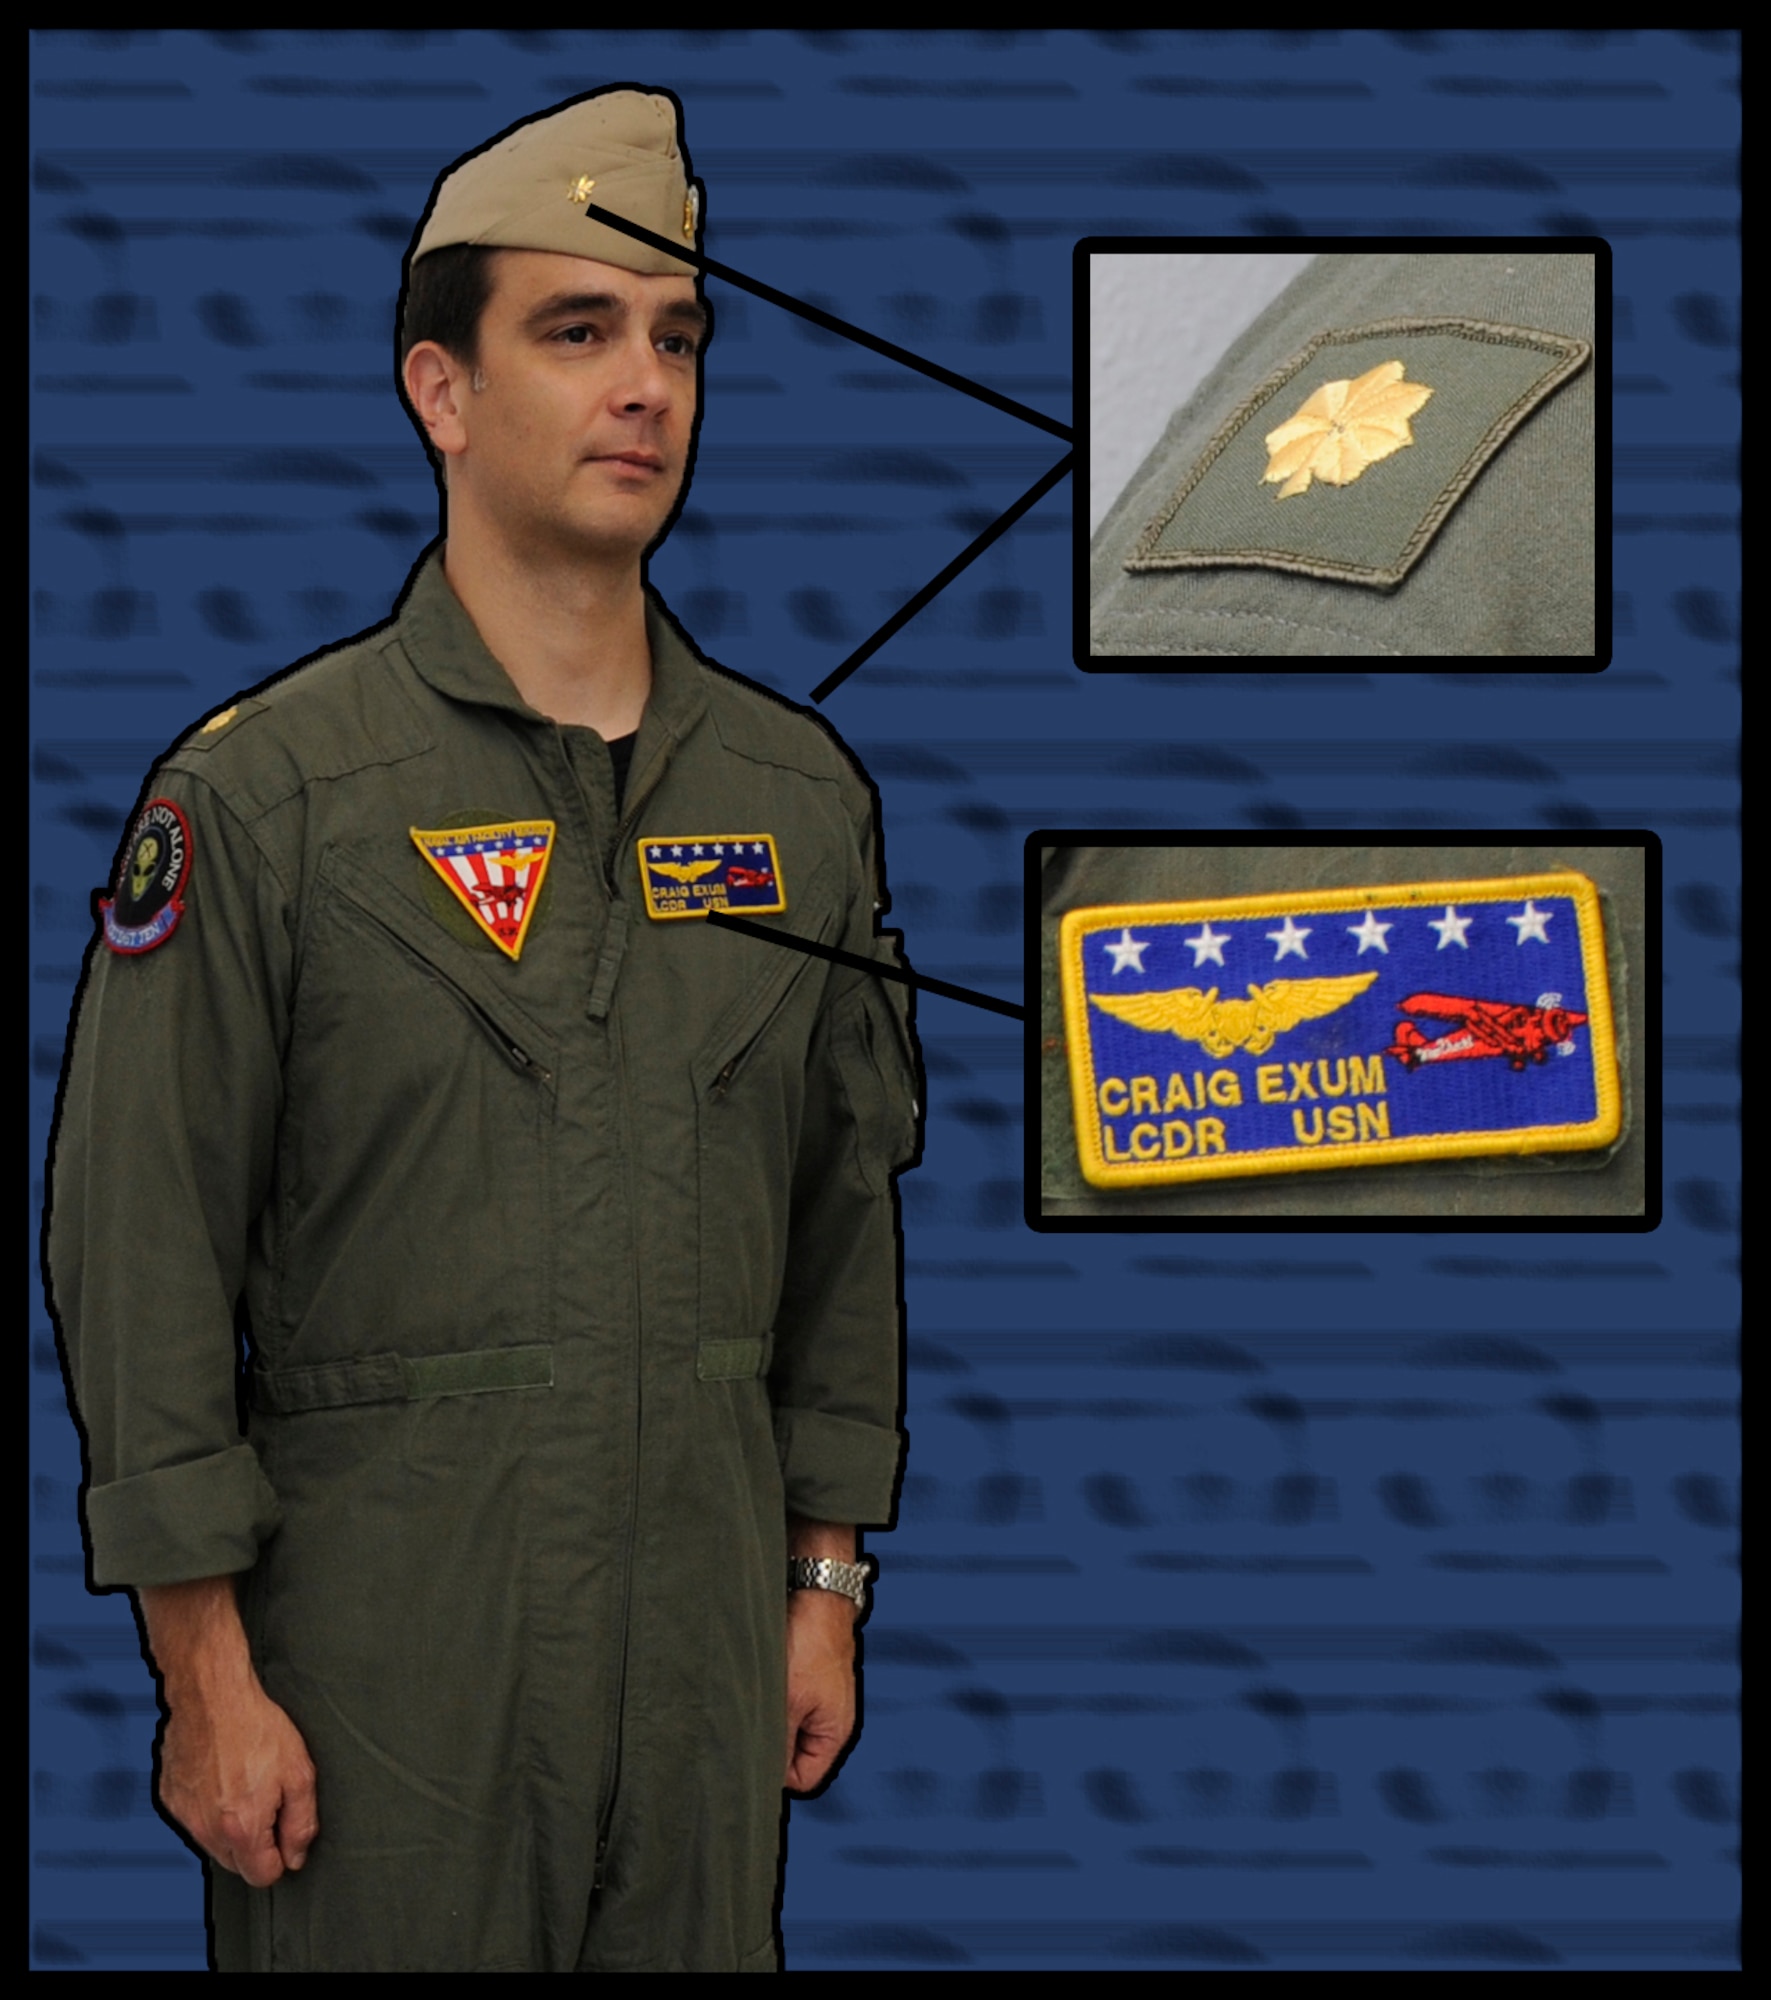 U.S. Navy Lt. Cmdr. Craig Exum, Naval Air Facility Misawa operations officer, displays a flight suit at Misawa Air Base, Japan, June 28, 2012. Pilots and aircrew members commonly wear this uniform here. The insignia for the uniform are located on the right side of the garrison cap and on shoulders. (U.S. Air Force graphic by Airman 1st Class Kaleb Snay/ Released)